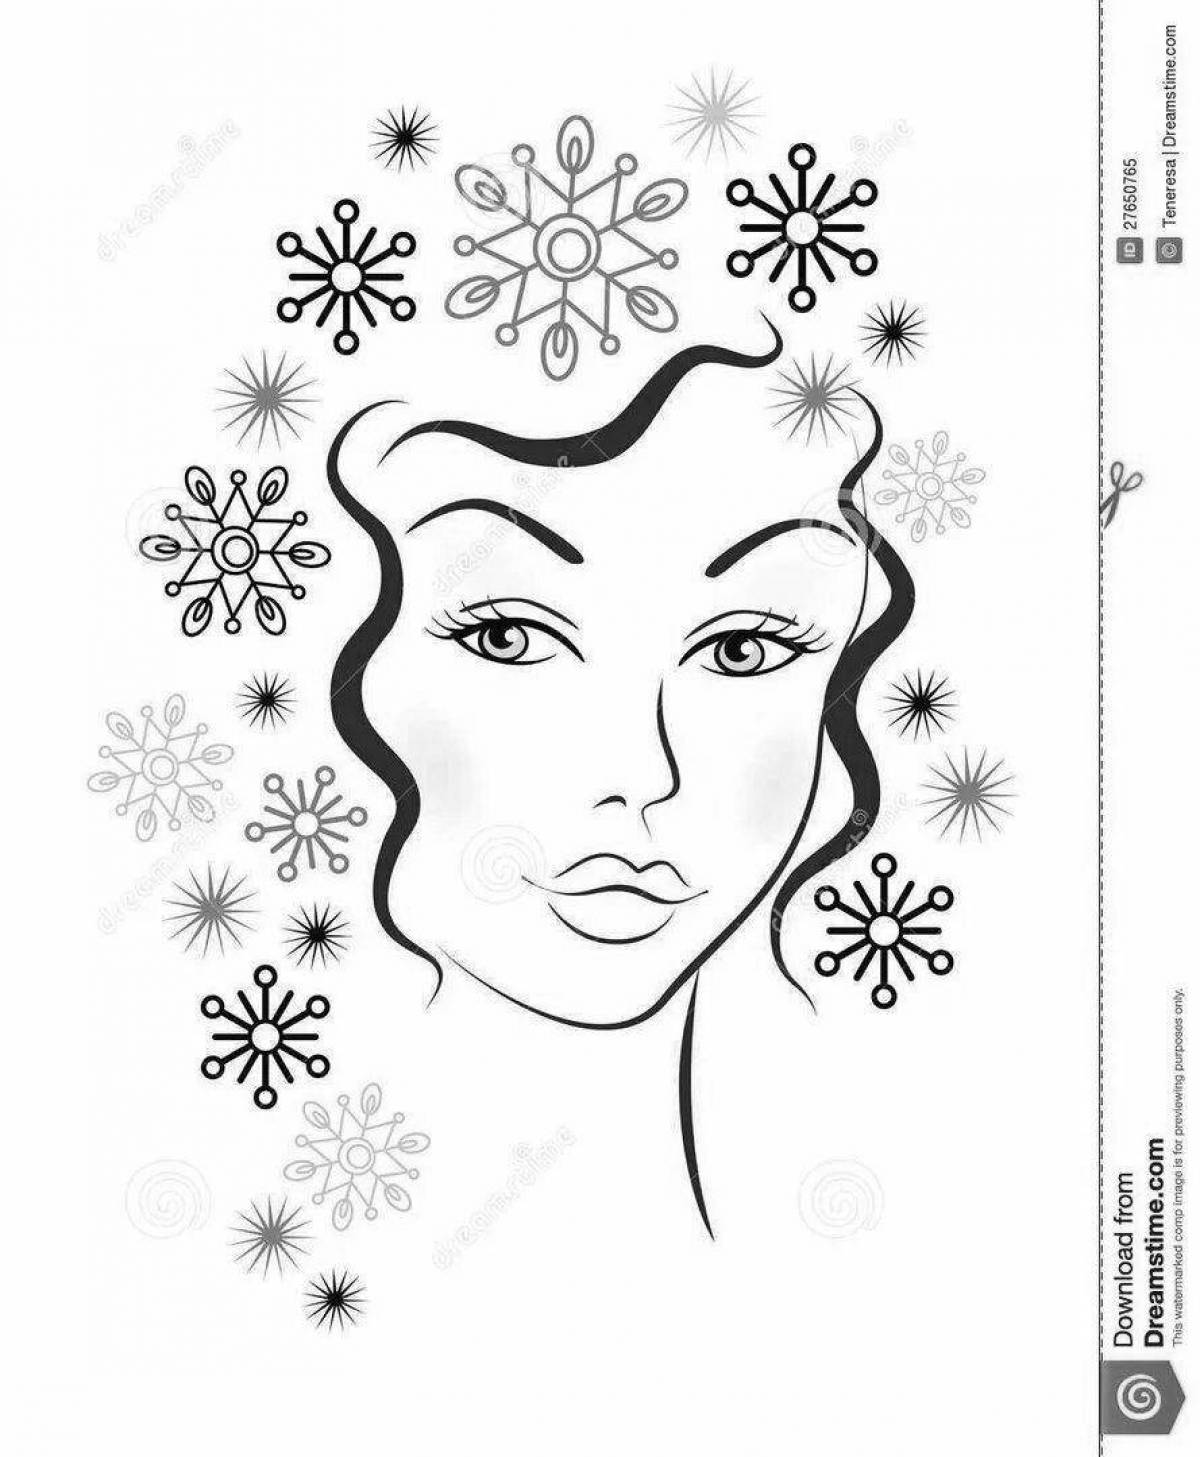 Colouring the amazing face of the snow maiden